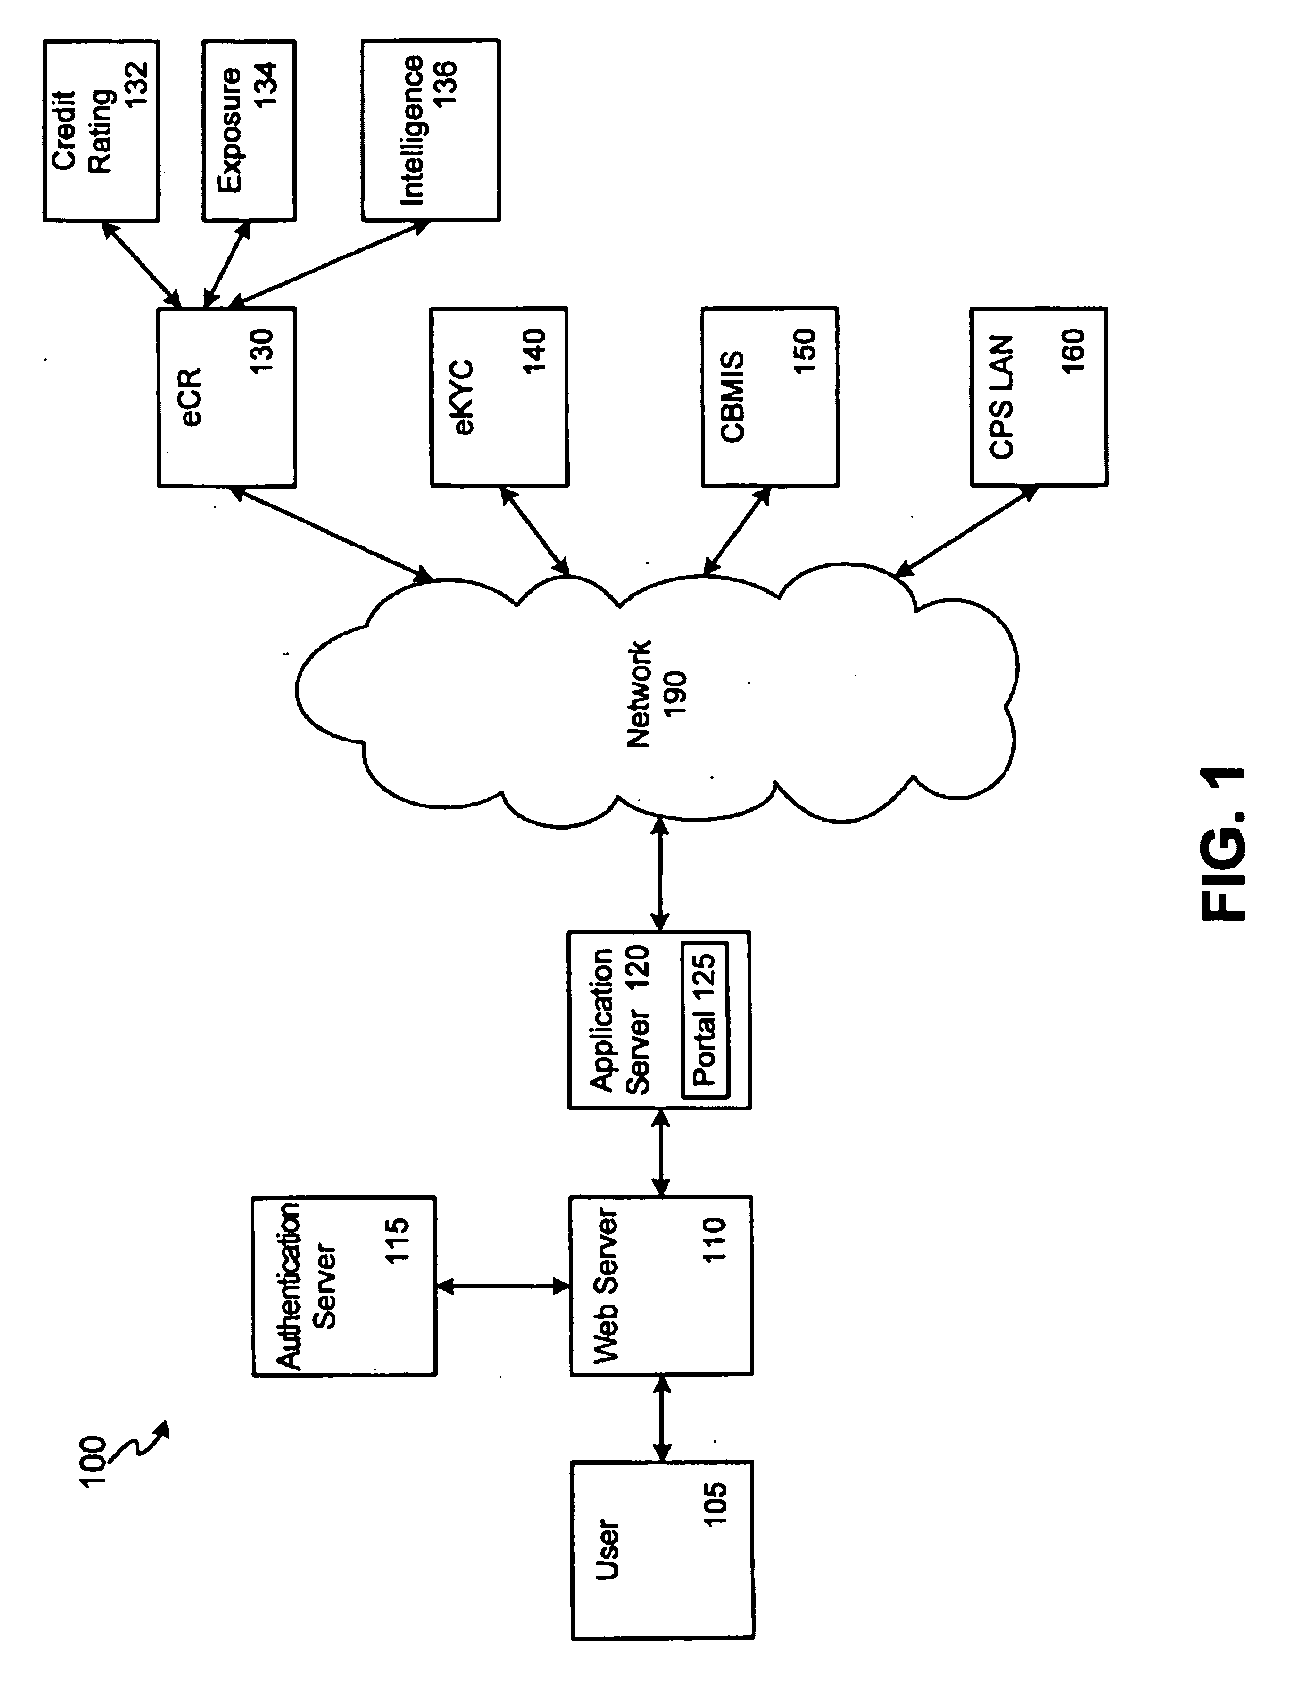 Financial institution portal system and method